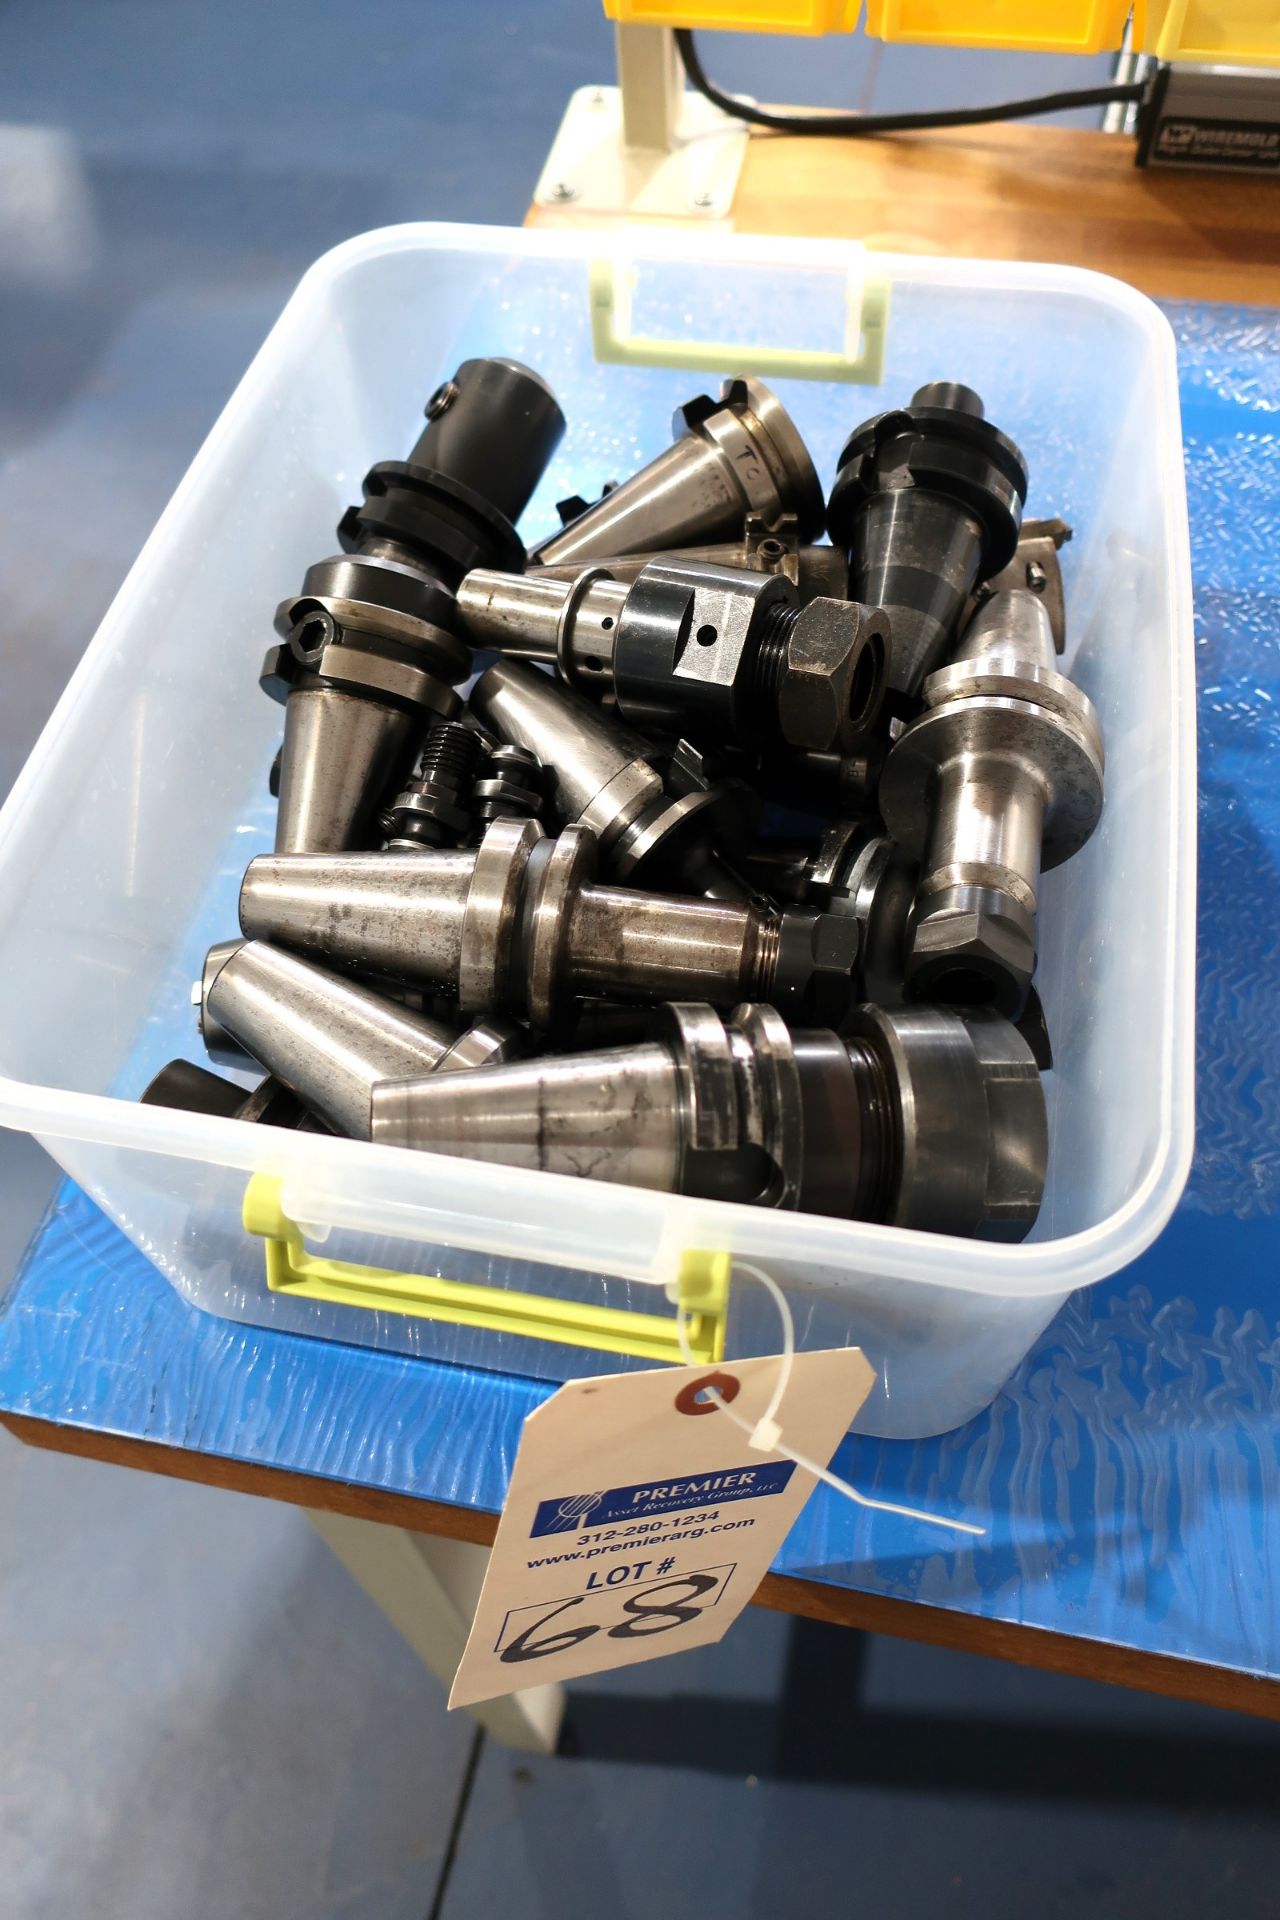 Approx. (20) 40-Taper Tool Holders